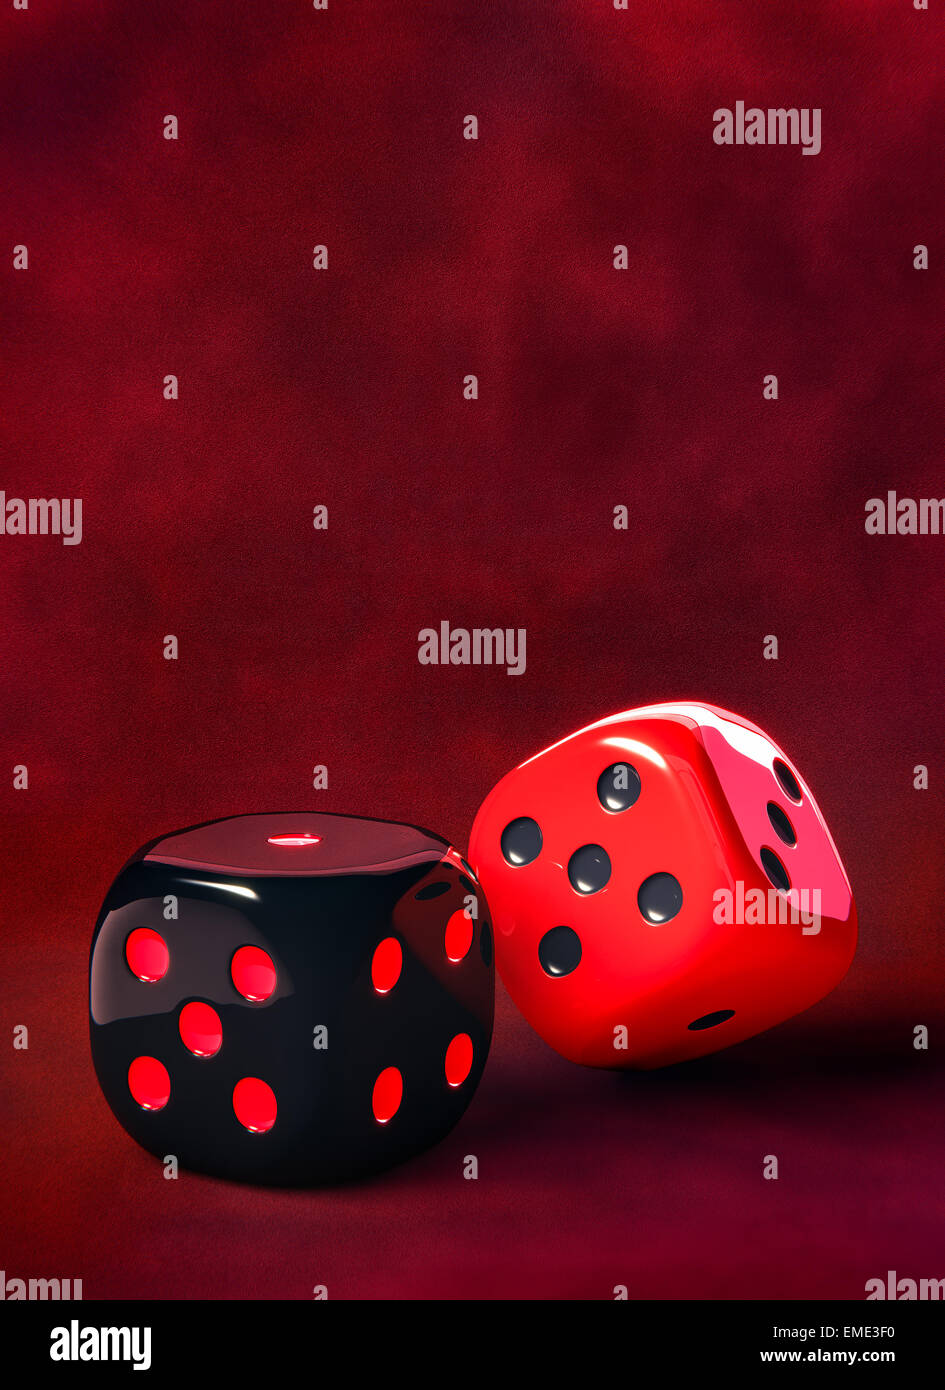 Pair of dice,red velvet background. Black and red dots Stock Photo